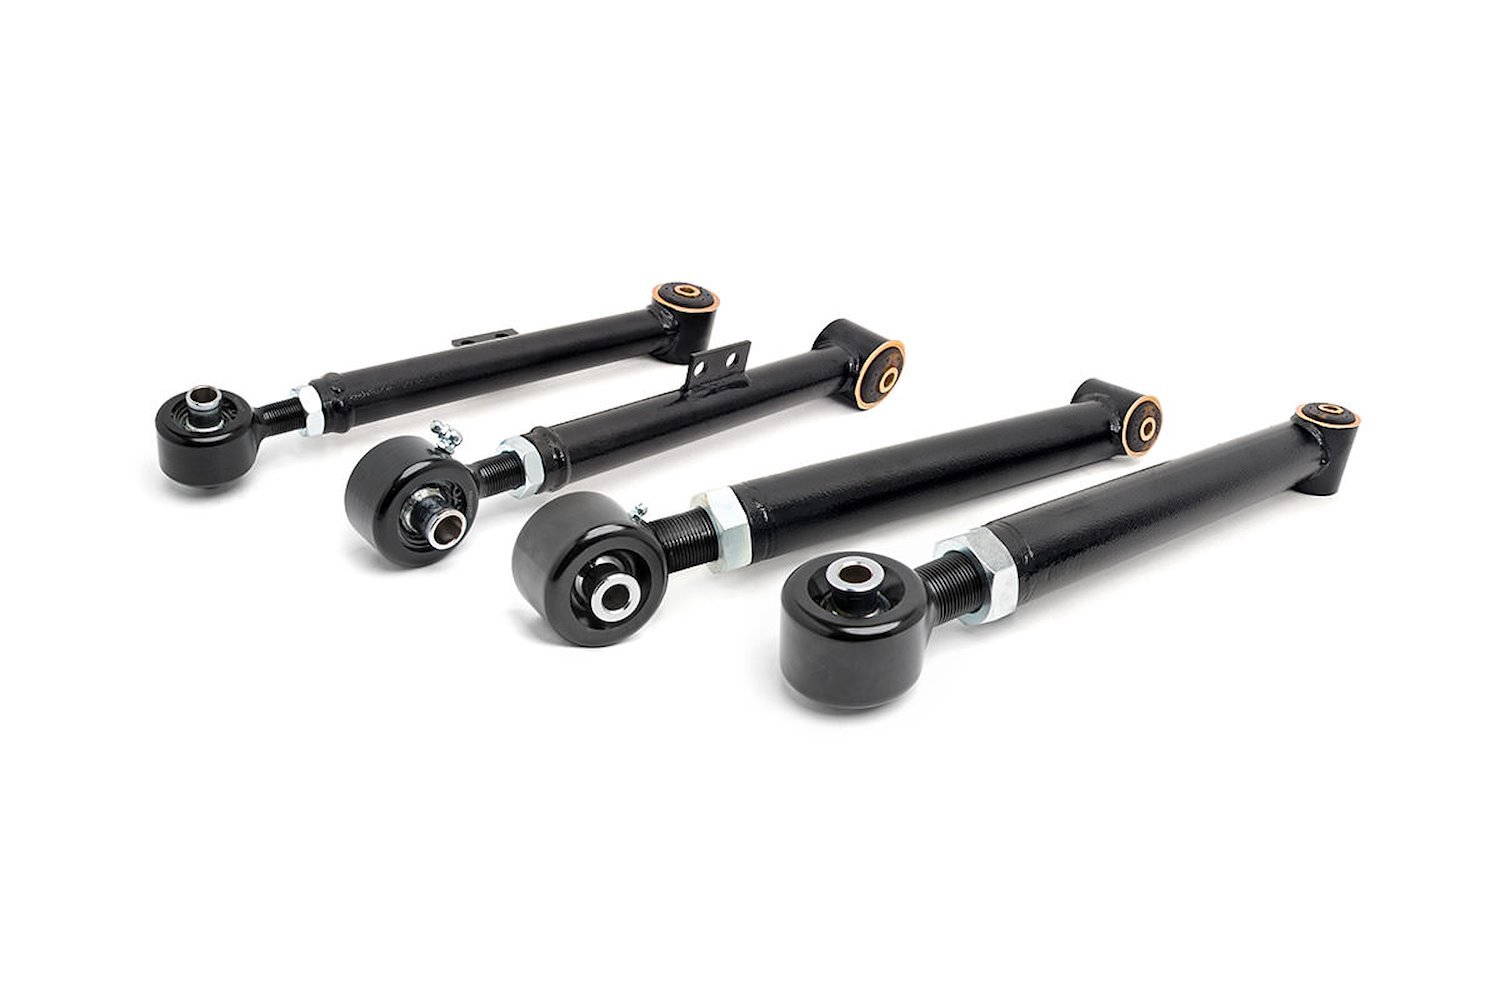 11910 Rear Upper and Lower X-Flex Adjustable Control Arms for 0-6.5-inch Lifts